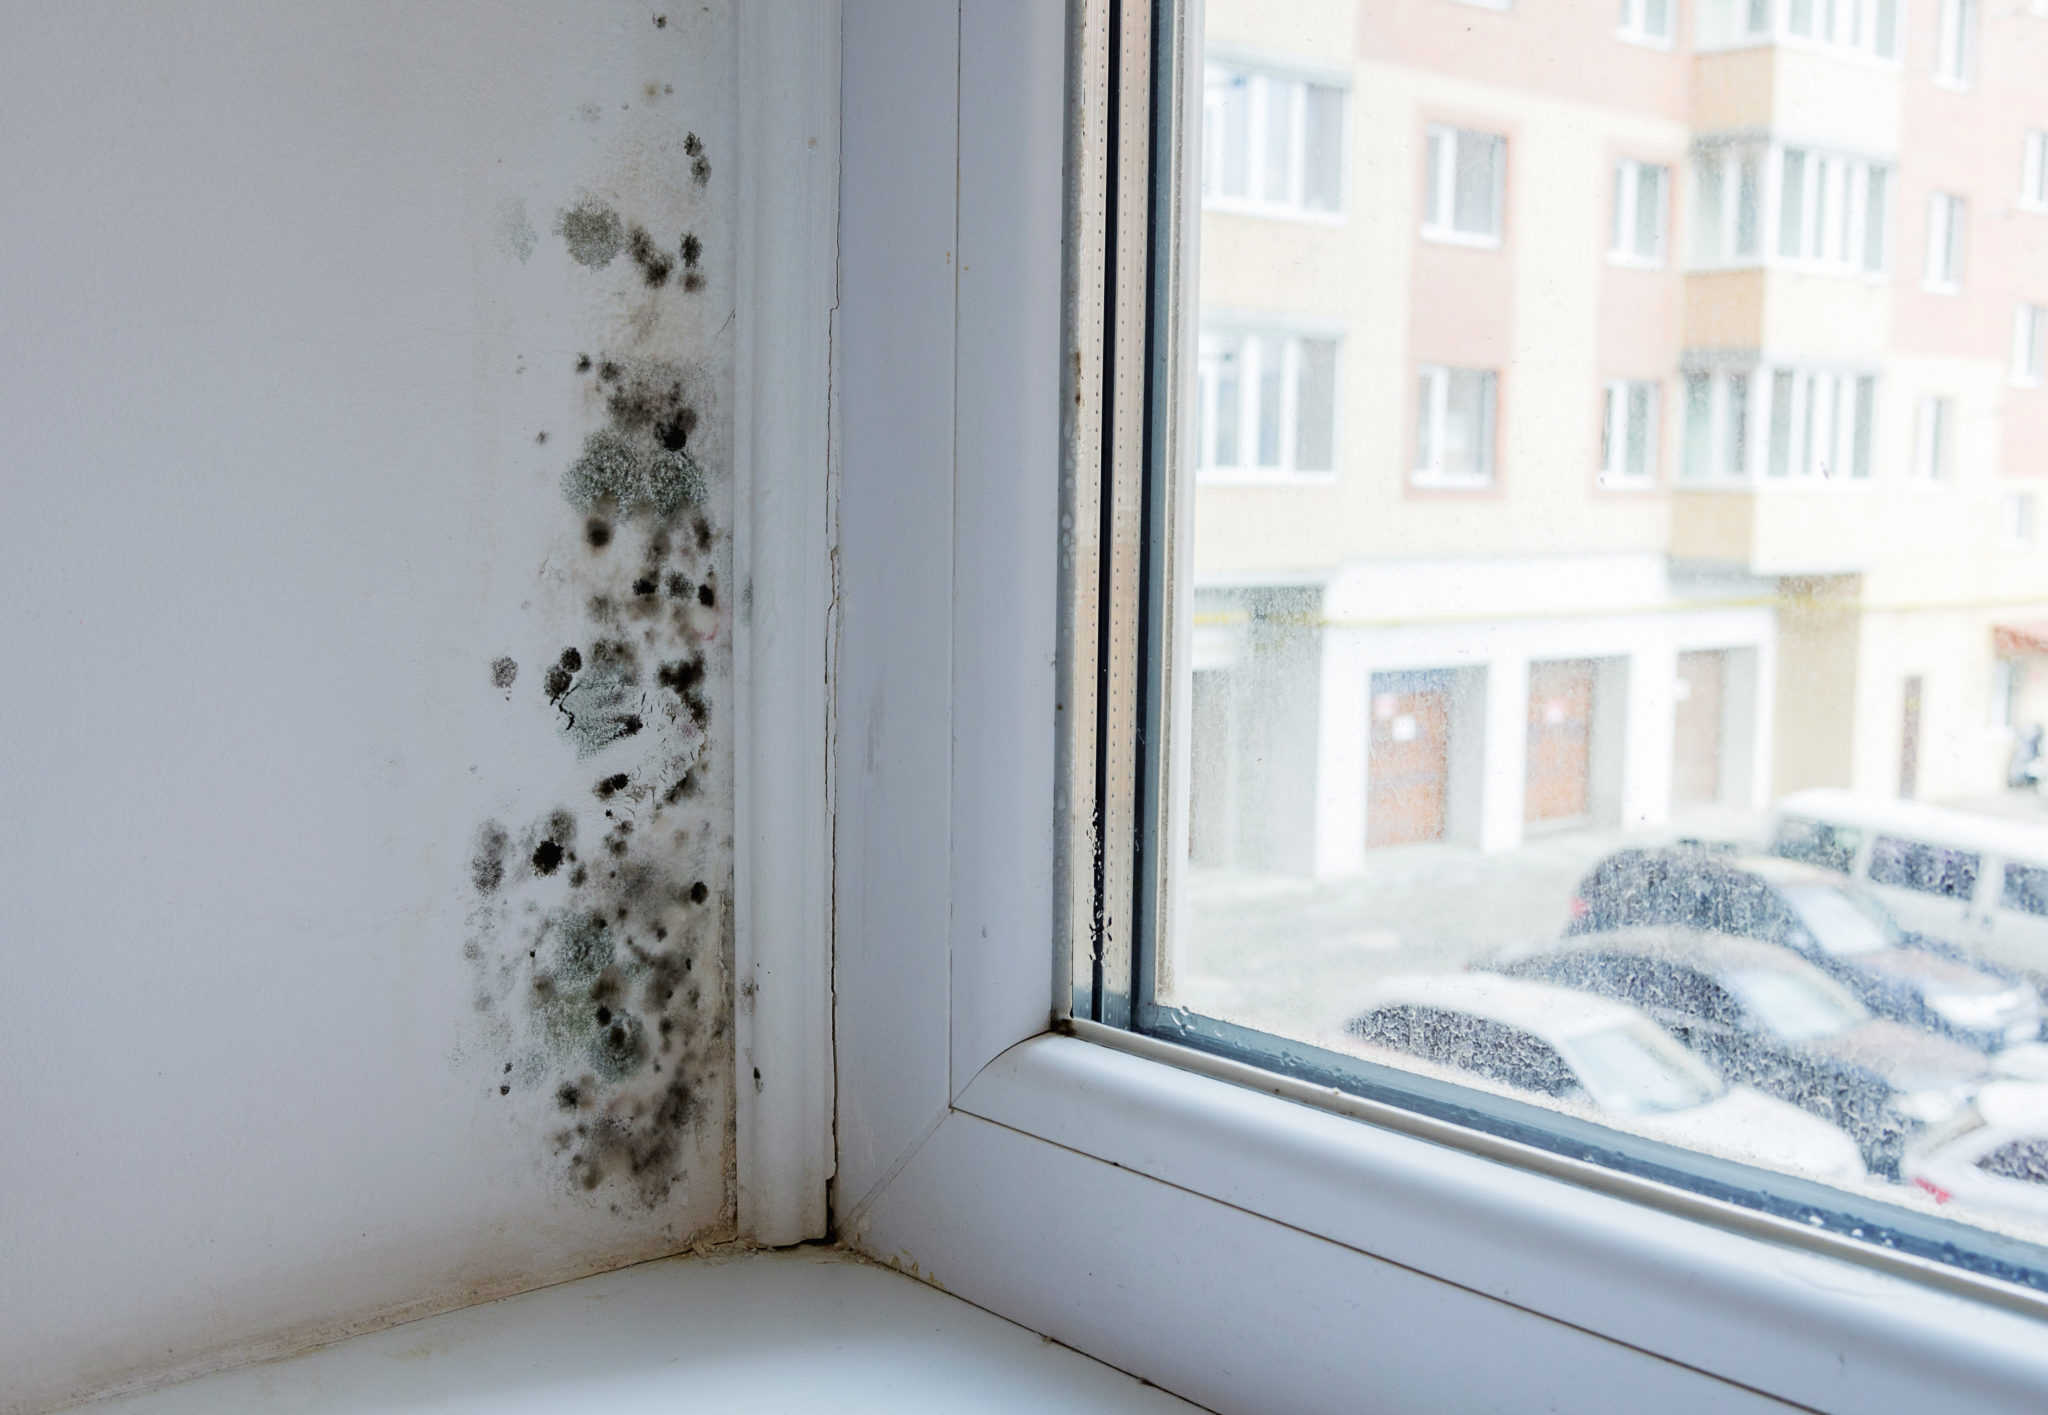 Black mould and fungus on wall near window. The problem of ventilation, dampness, cold in the apartment.